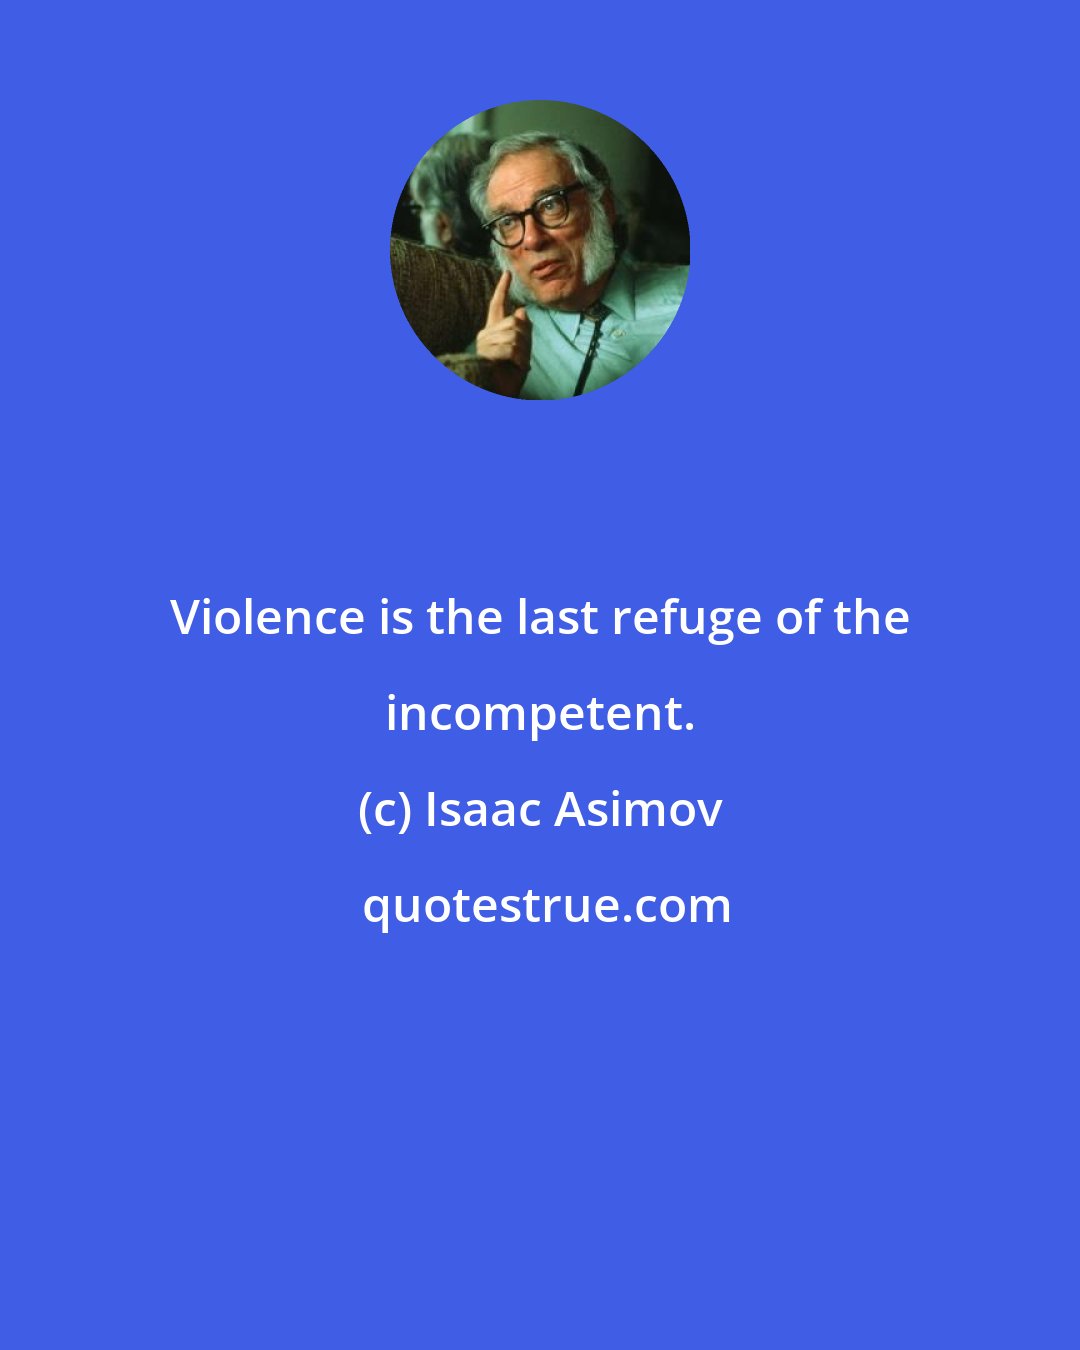 Isaac Asimov: Violence is the last refuge of the incompetent.